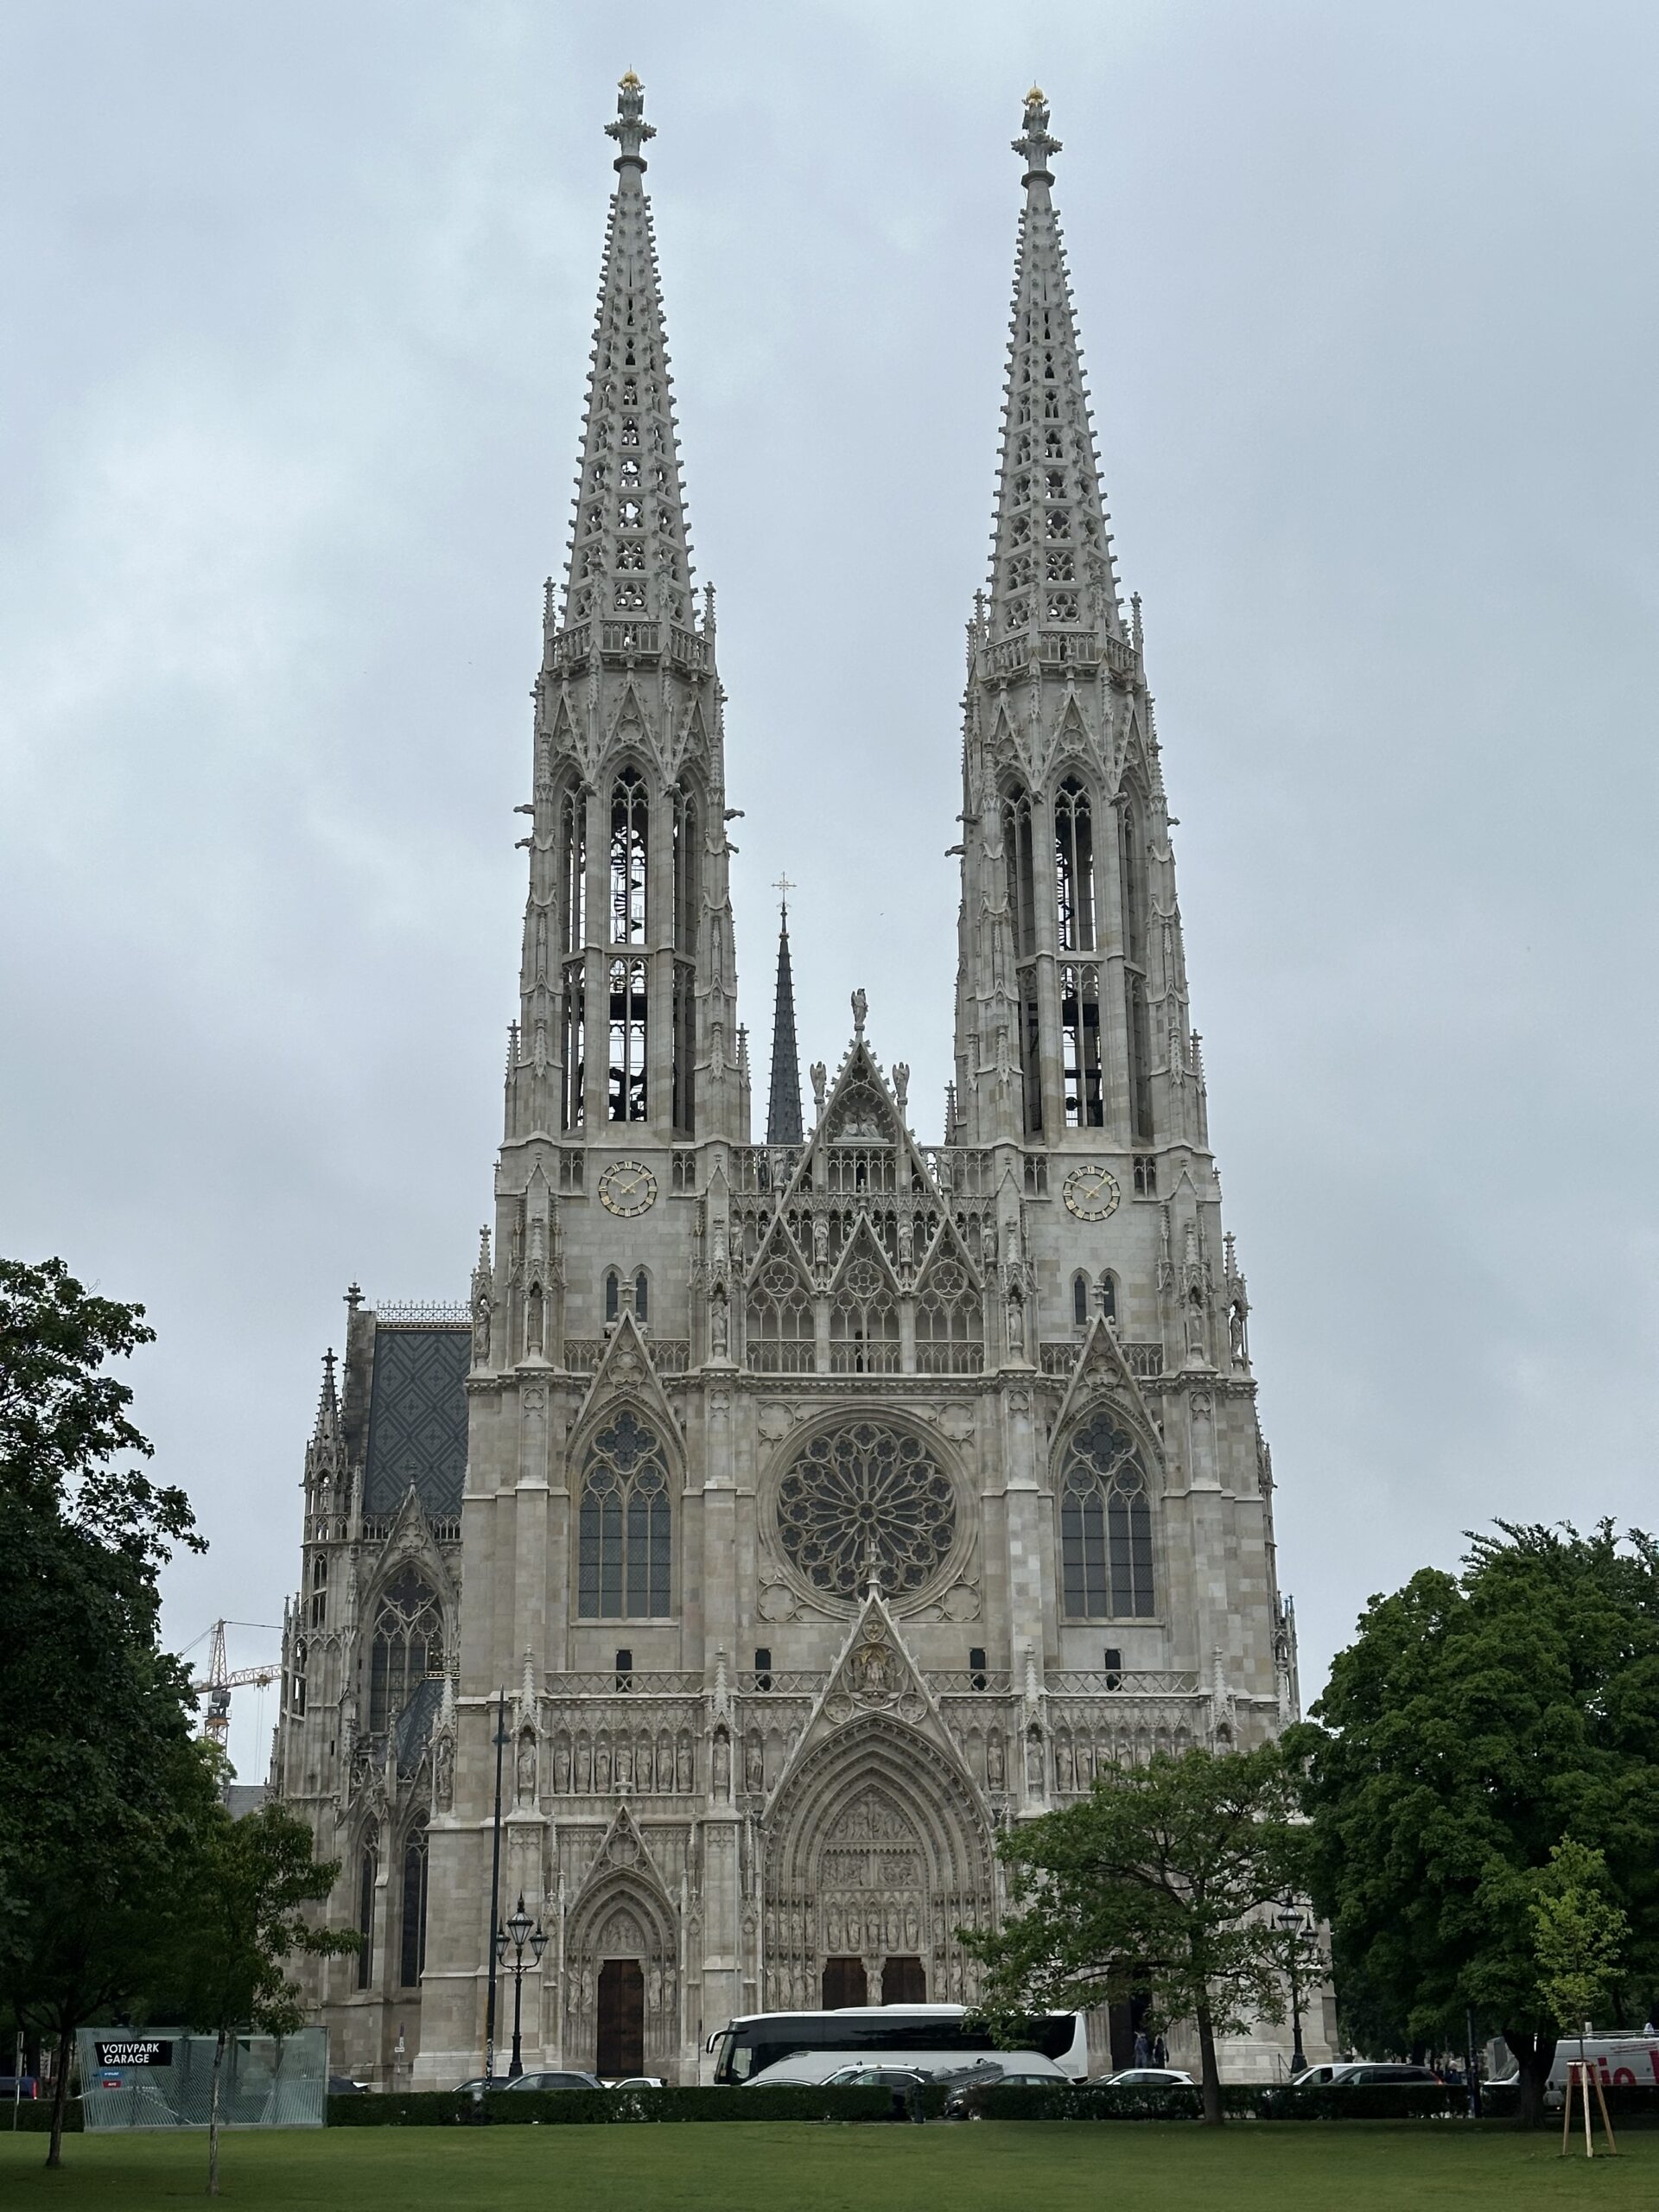 The Votive Church in Vienna, Austria, on a cold and rainy day in May.